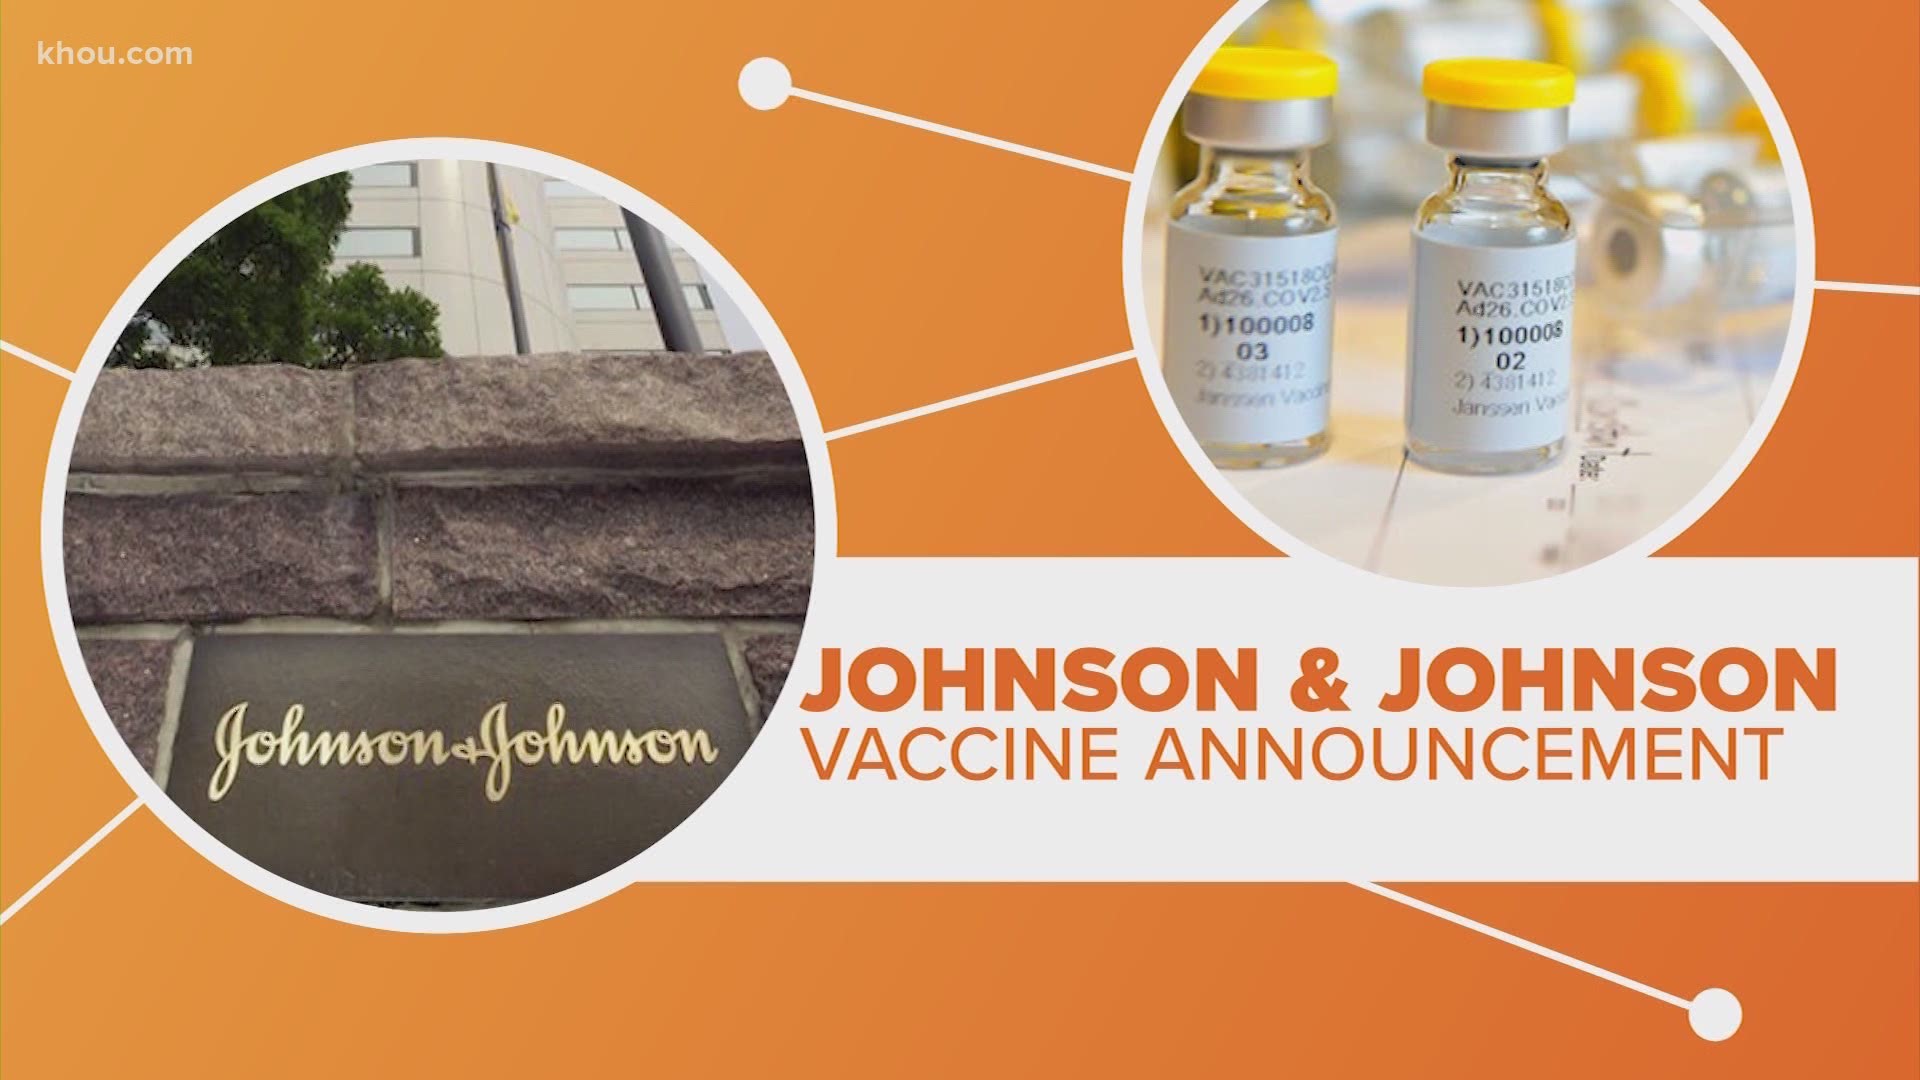 Johnson and Johnson revealed it has started the final stage of clinical trials for its coronavirus vaccine.